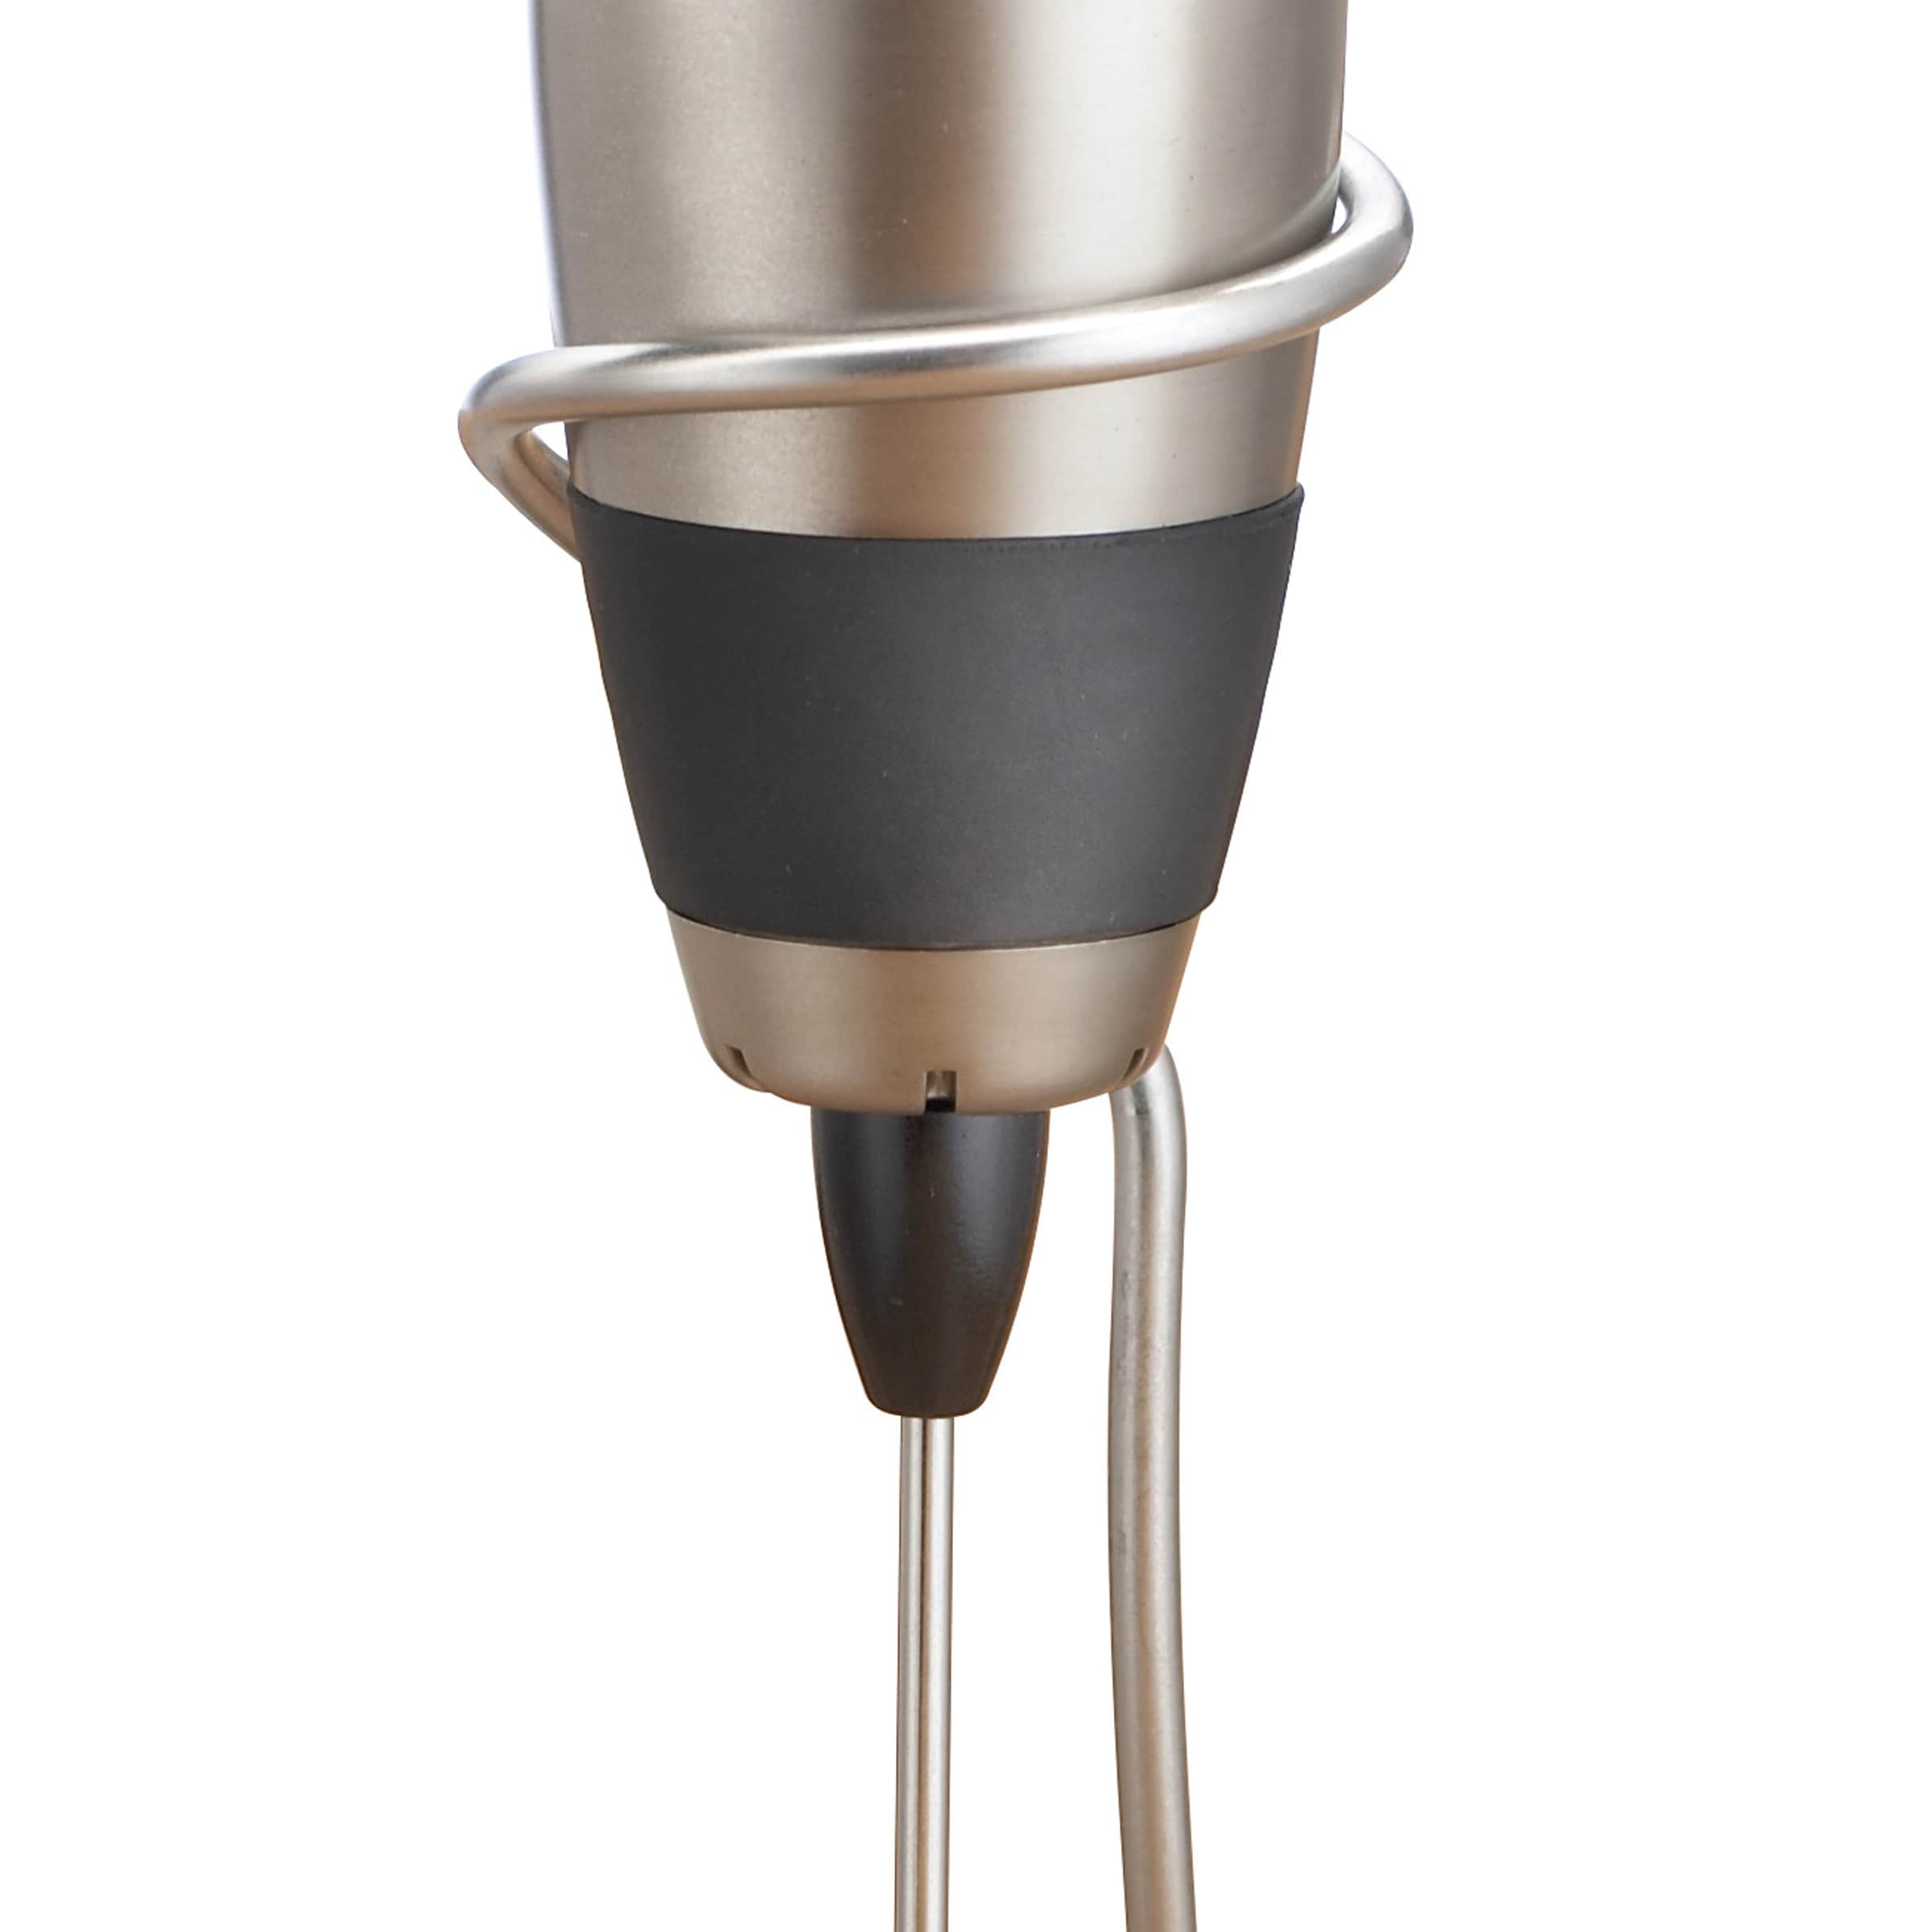 BonJour Stainless Steel Milk Frother - Bed Bath & Beyond - 7469243